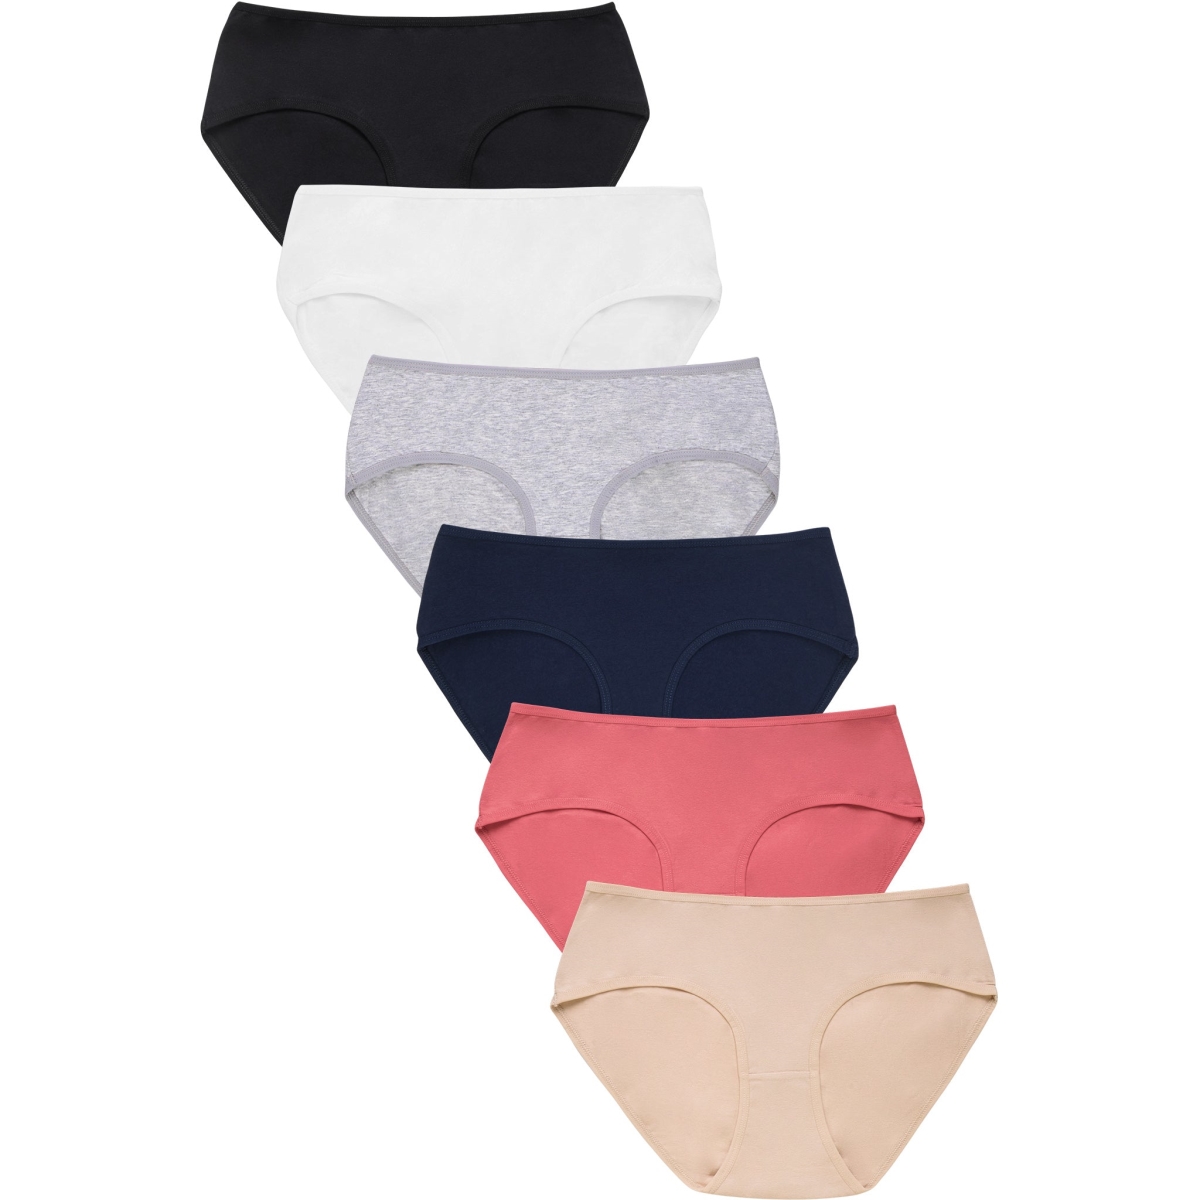 Picture of 247 Frenzy 247-LP1379CKE4-MD Sofra Womens Essentials Cotton Stretch Bikini Panty Underwear with Extended Side Seams - Assorted Color - Medium - Pack of 6